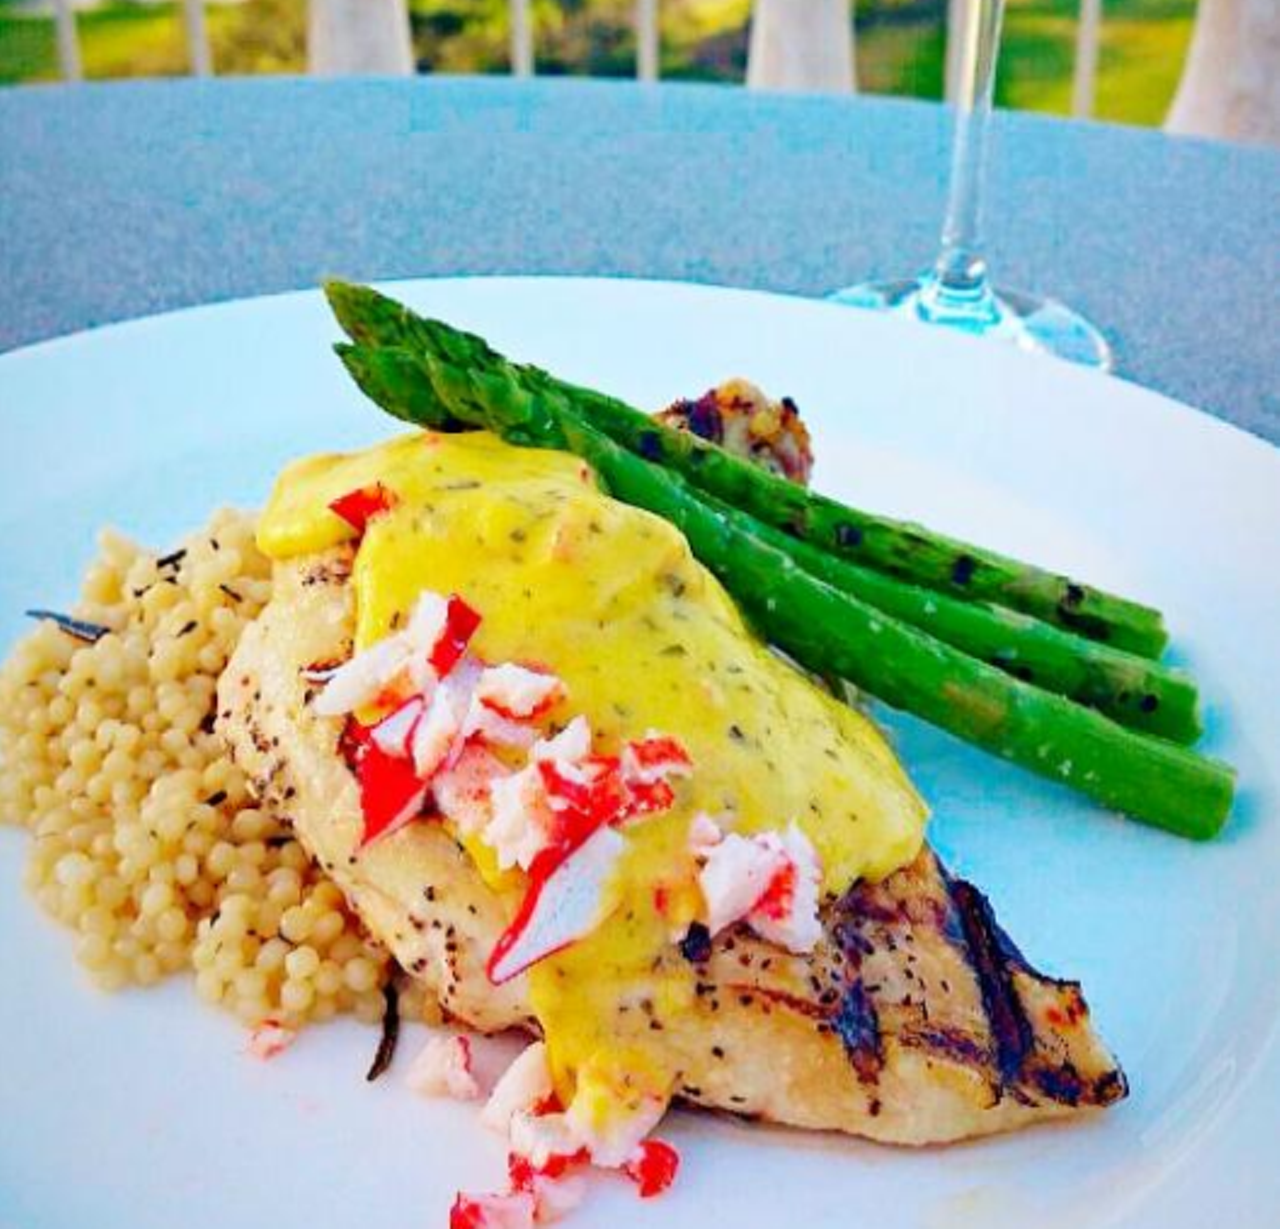  Chicken a la Oscar at Eleven at Reunion Resort
Another dual-meat, uber-classic preparation of &#147;airline chicken&#148; (just means that it&#146;s still on the bone = more flavor) plus jumbo lumb crab meat, couscous salad and bearnaise sauce.
7593 Gathering Drive, 407-396-5290
Photo via Eleven at Reunion Resort/Tripadvisor